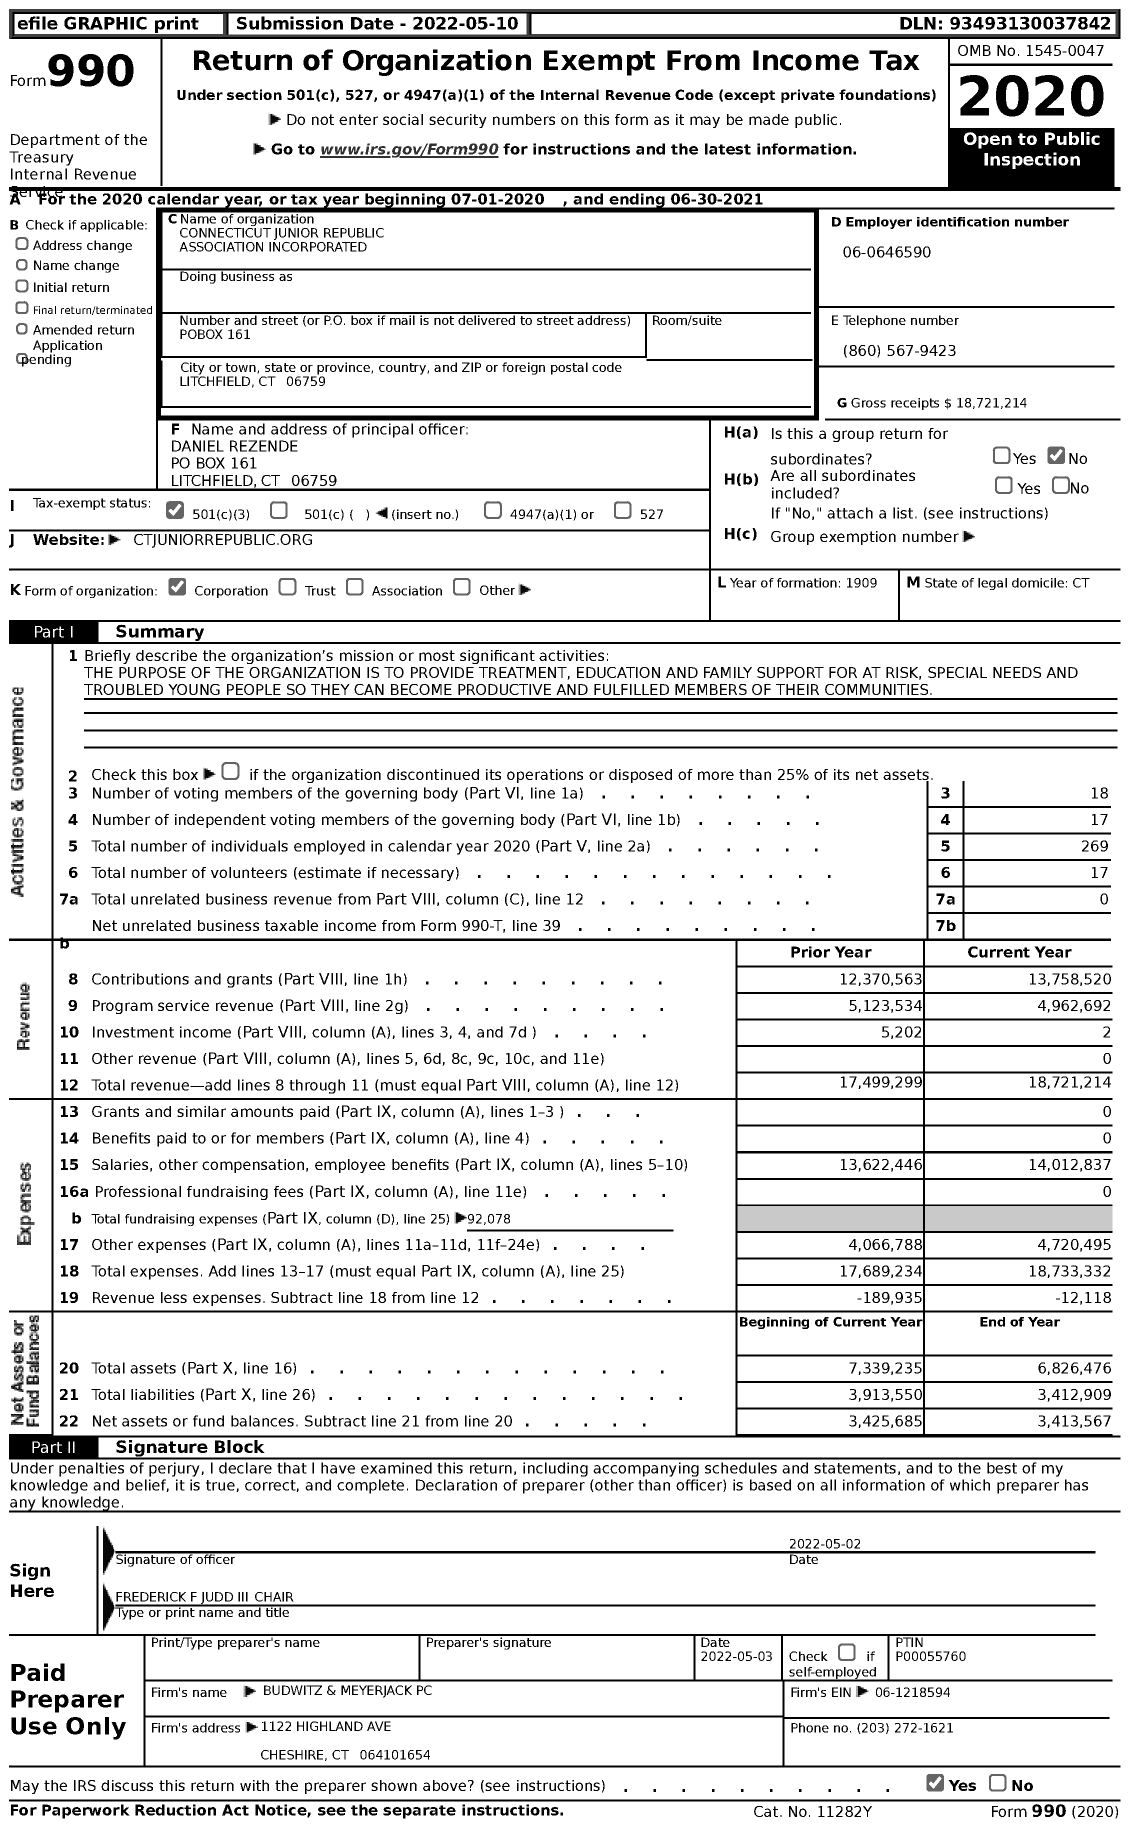 Image of first page of 2020 Form 990 for Connecticut Junior Republic Association Incorporated